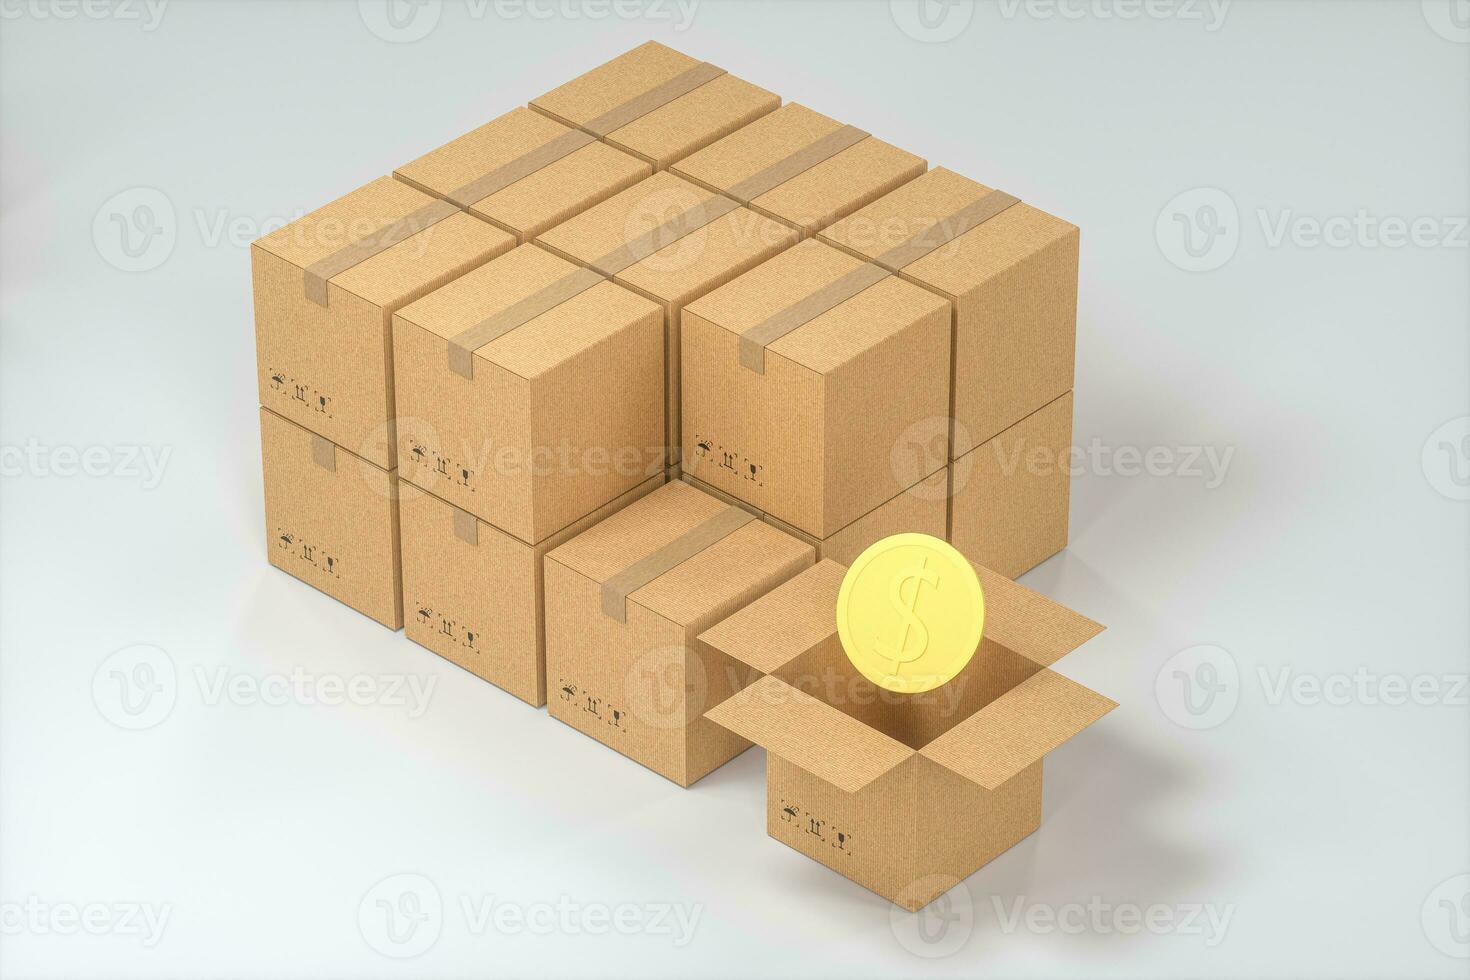 The cartons and COINS are on a white background, 3d rendering. photo